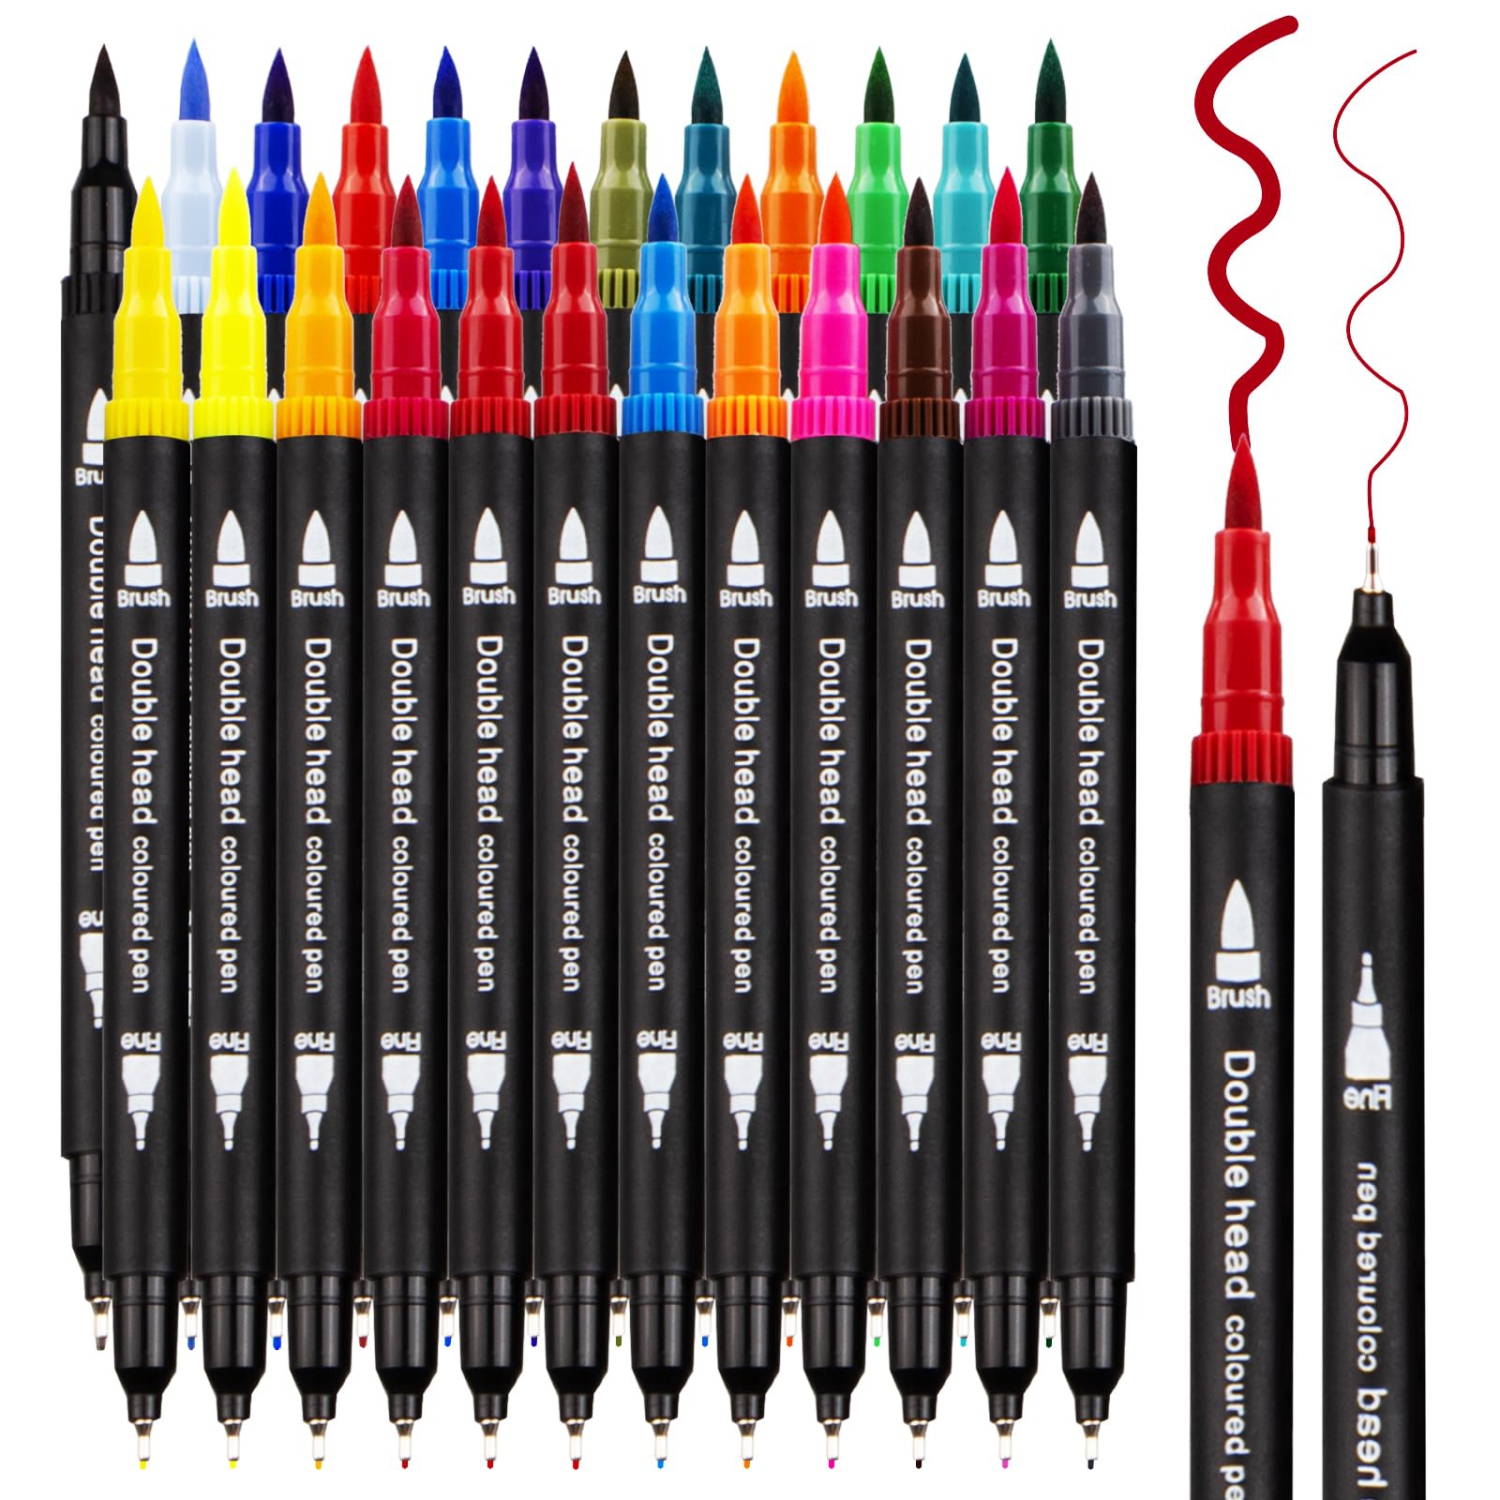 Colorful Creations: Dual Tip Art Markers - Set of 24 Fine and Brush Pens for Painting, Coloring, Sketching - Ideal for Kids, Adults, and Artists